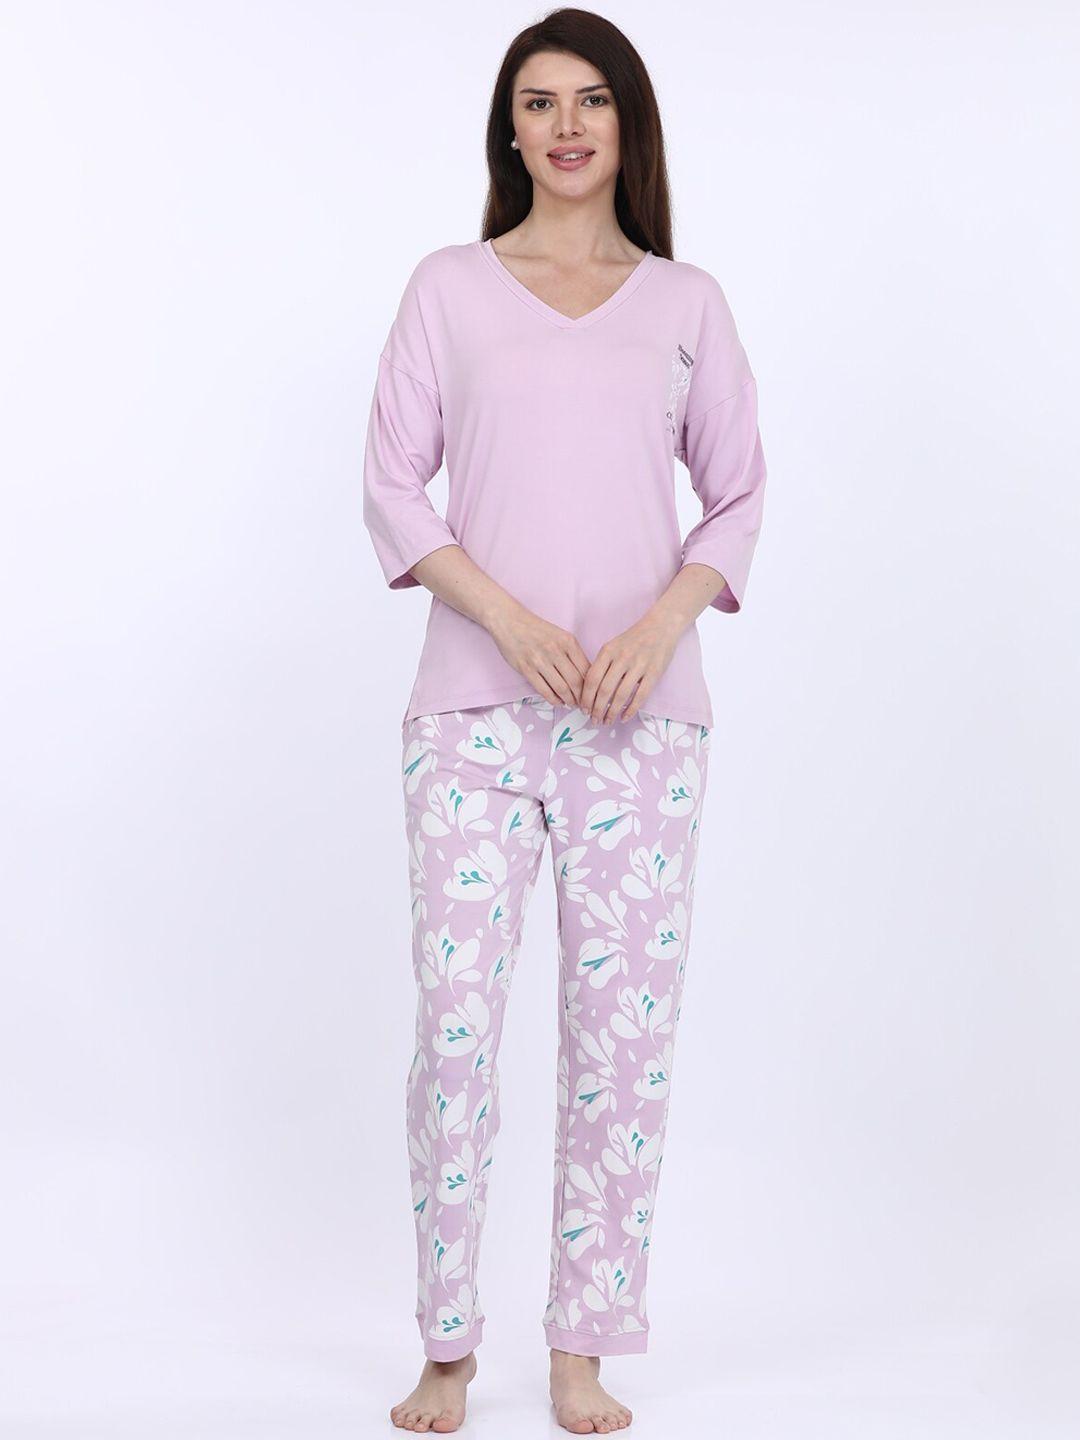 maysixty women peach-coloured printed night suit